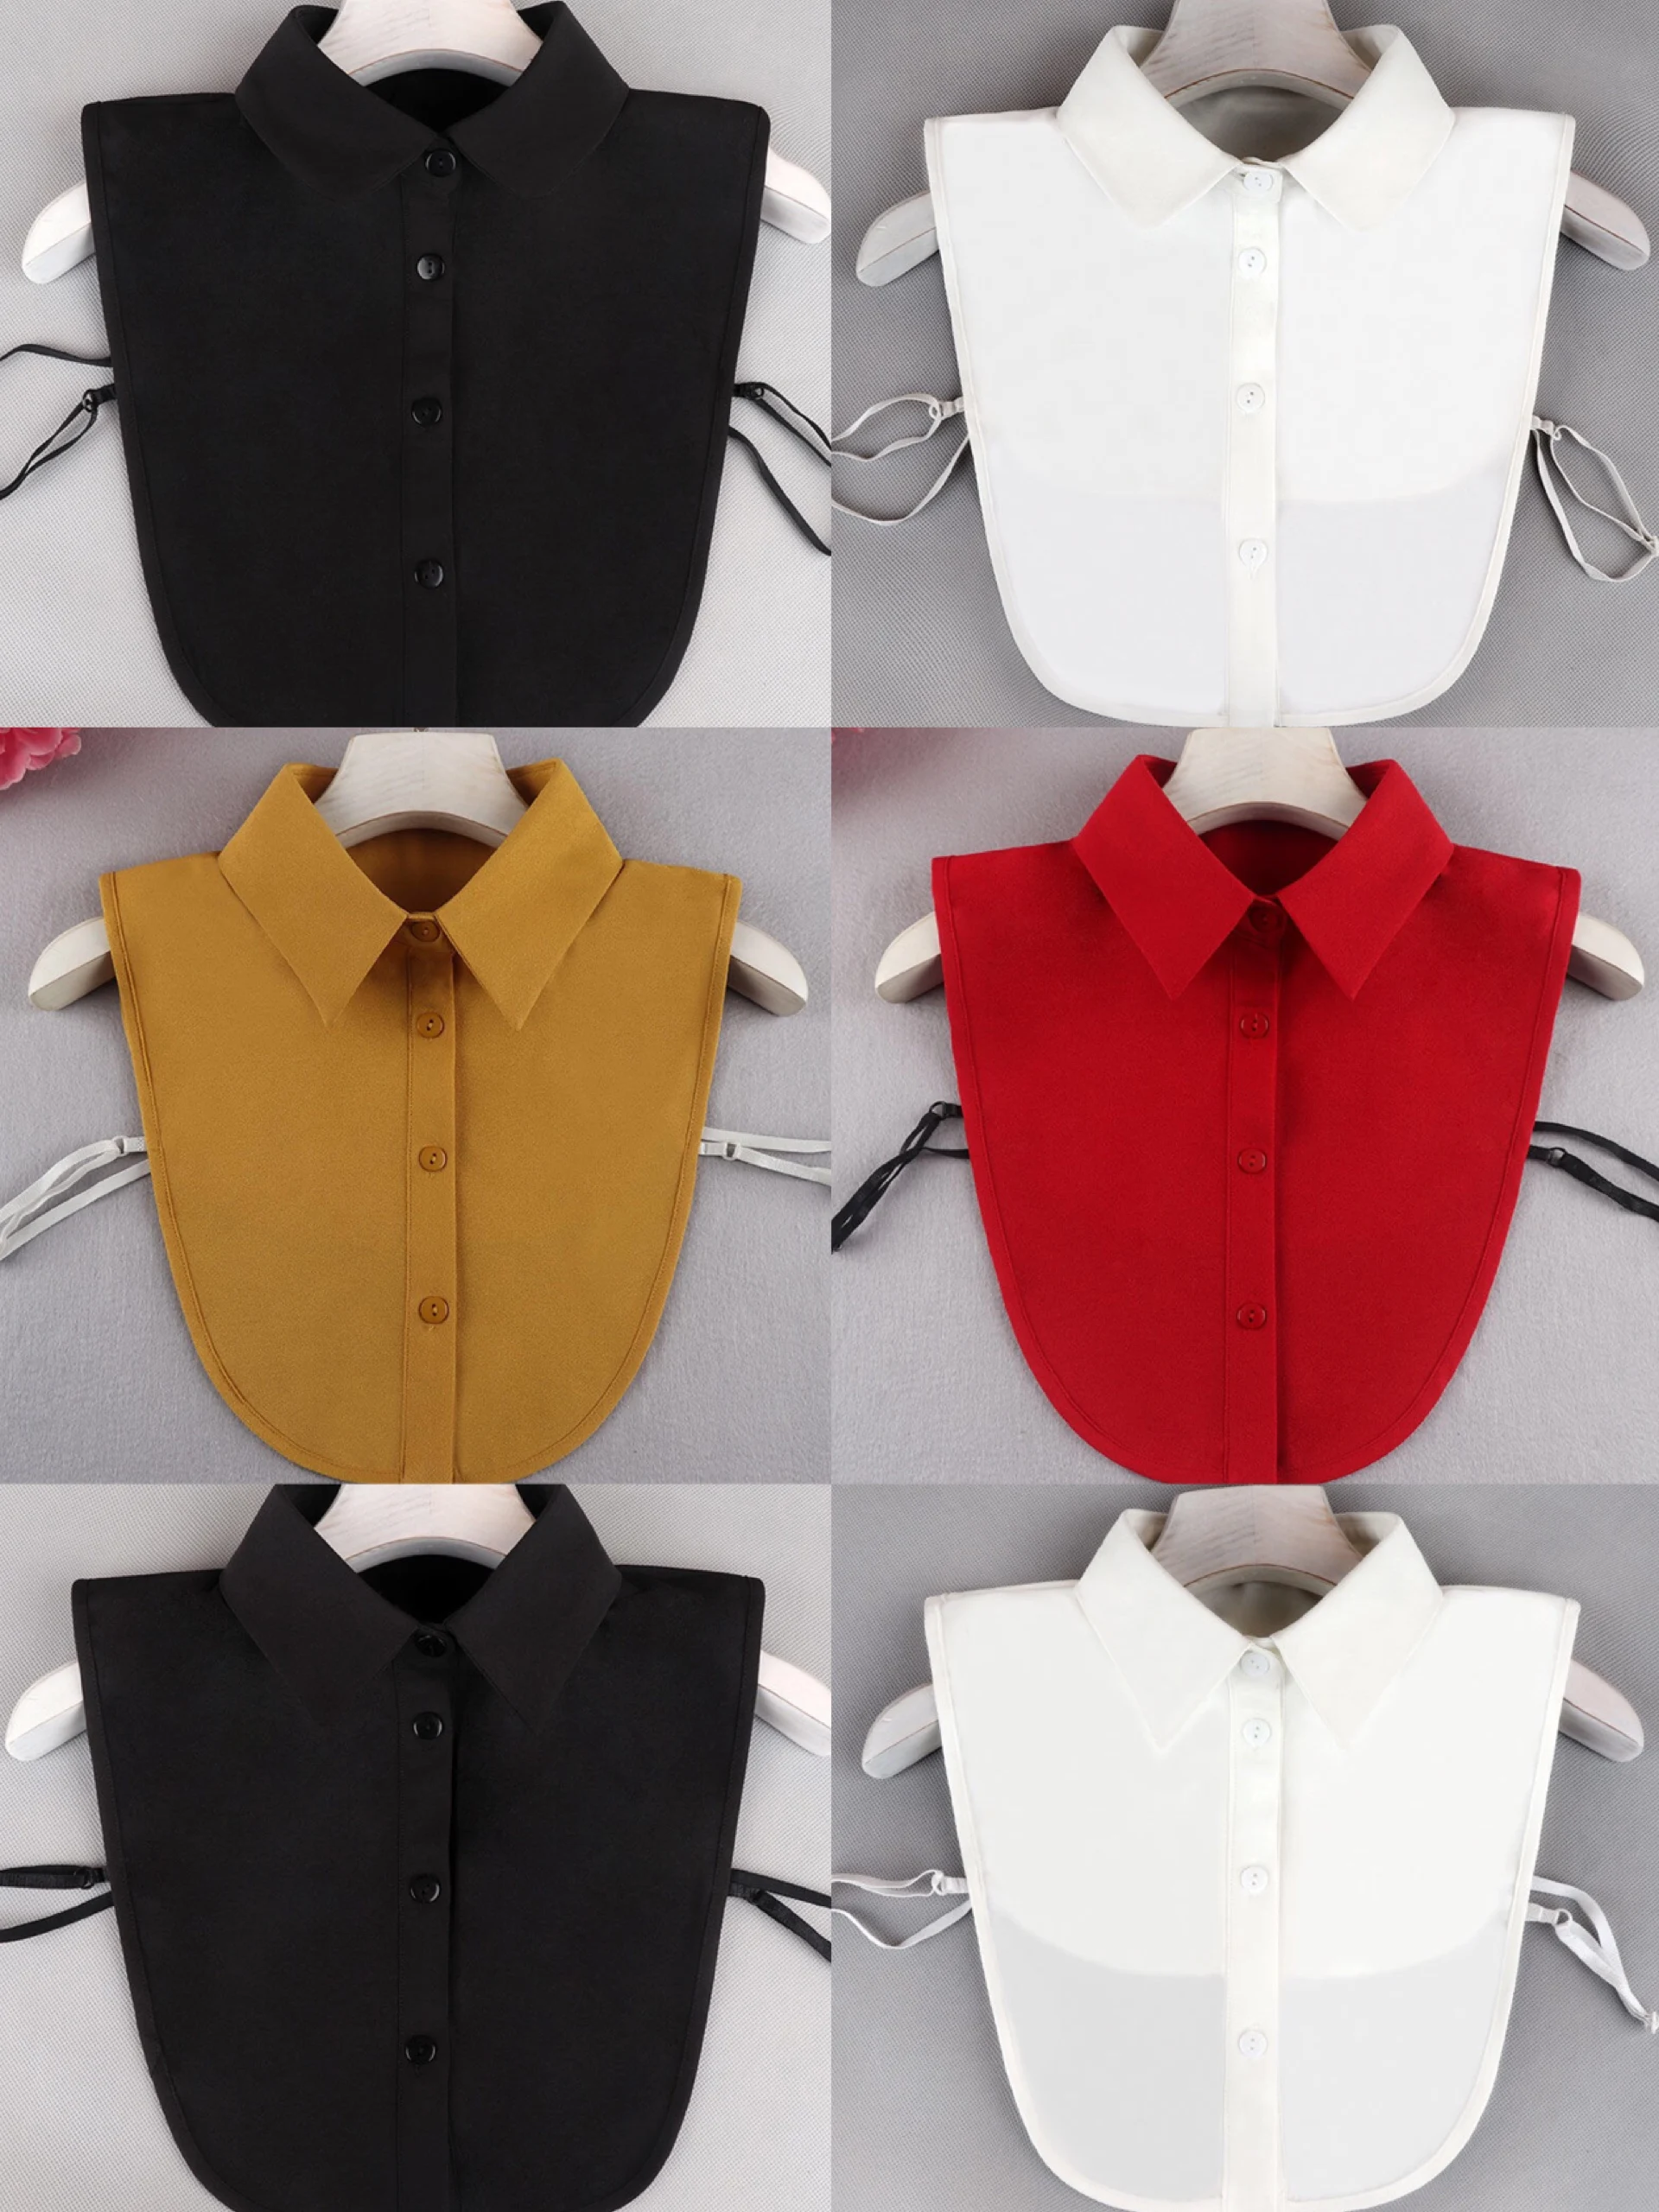 2021 New Brand Stylish Pure Solid Ladies Shirt Vintage Fake Collars Causal Detachable Collar Black White Clothes Accessories